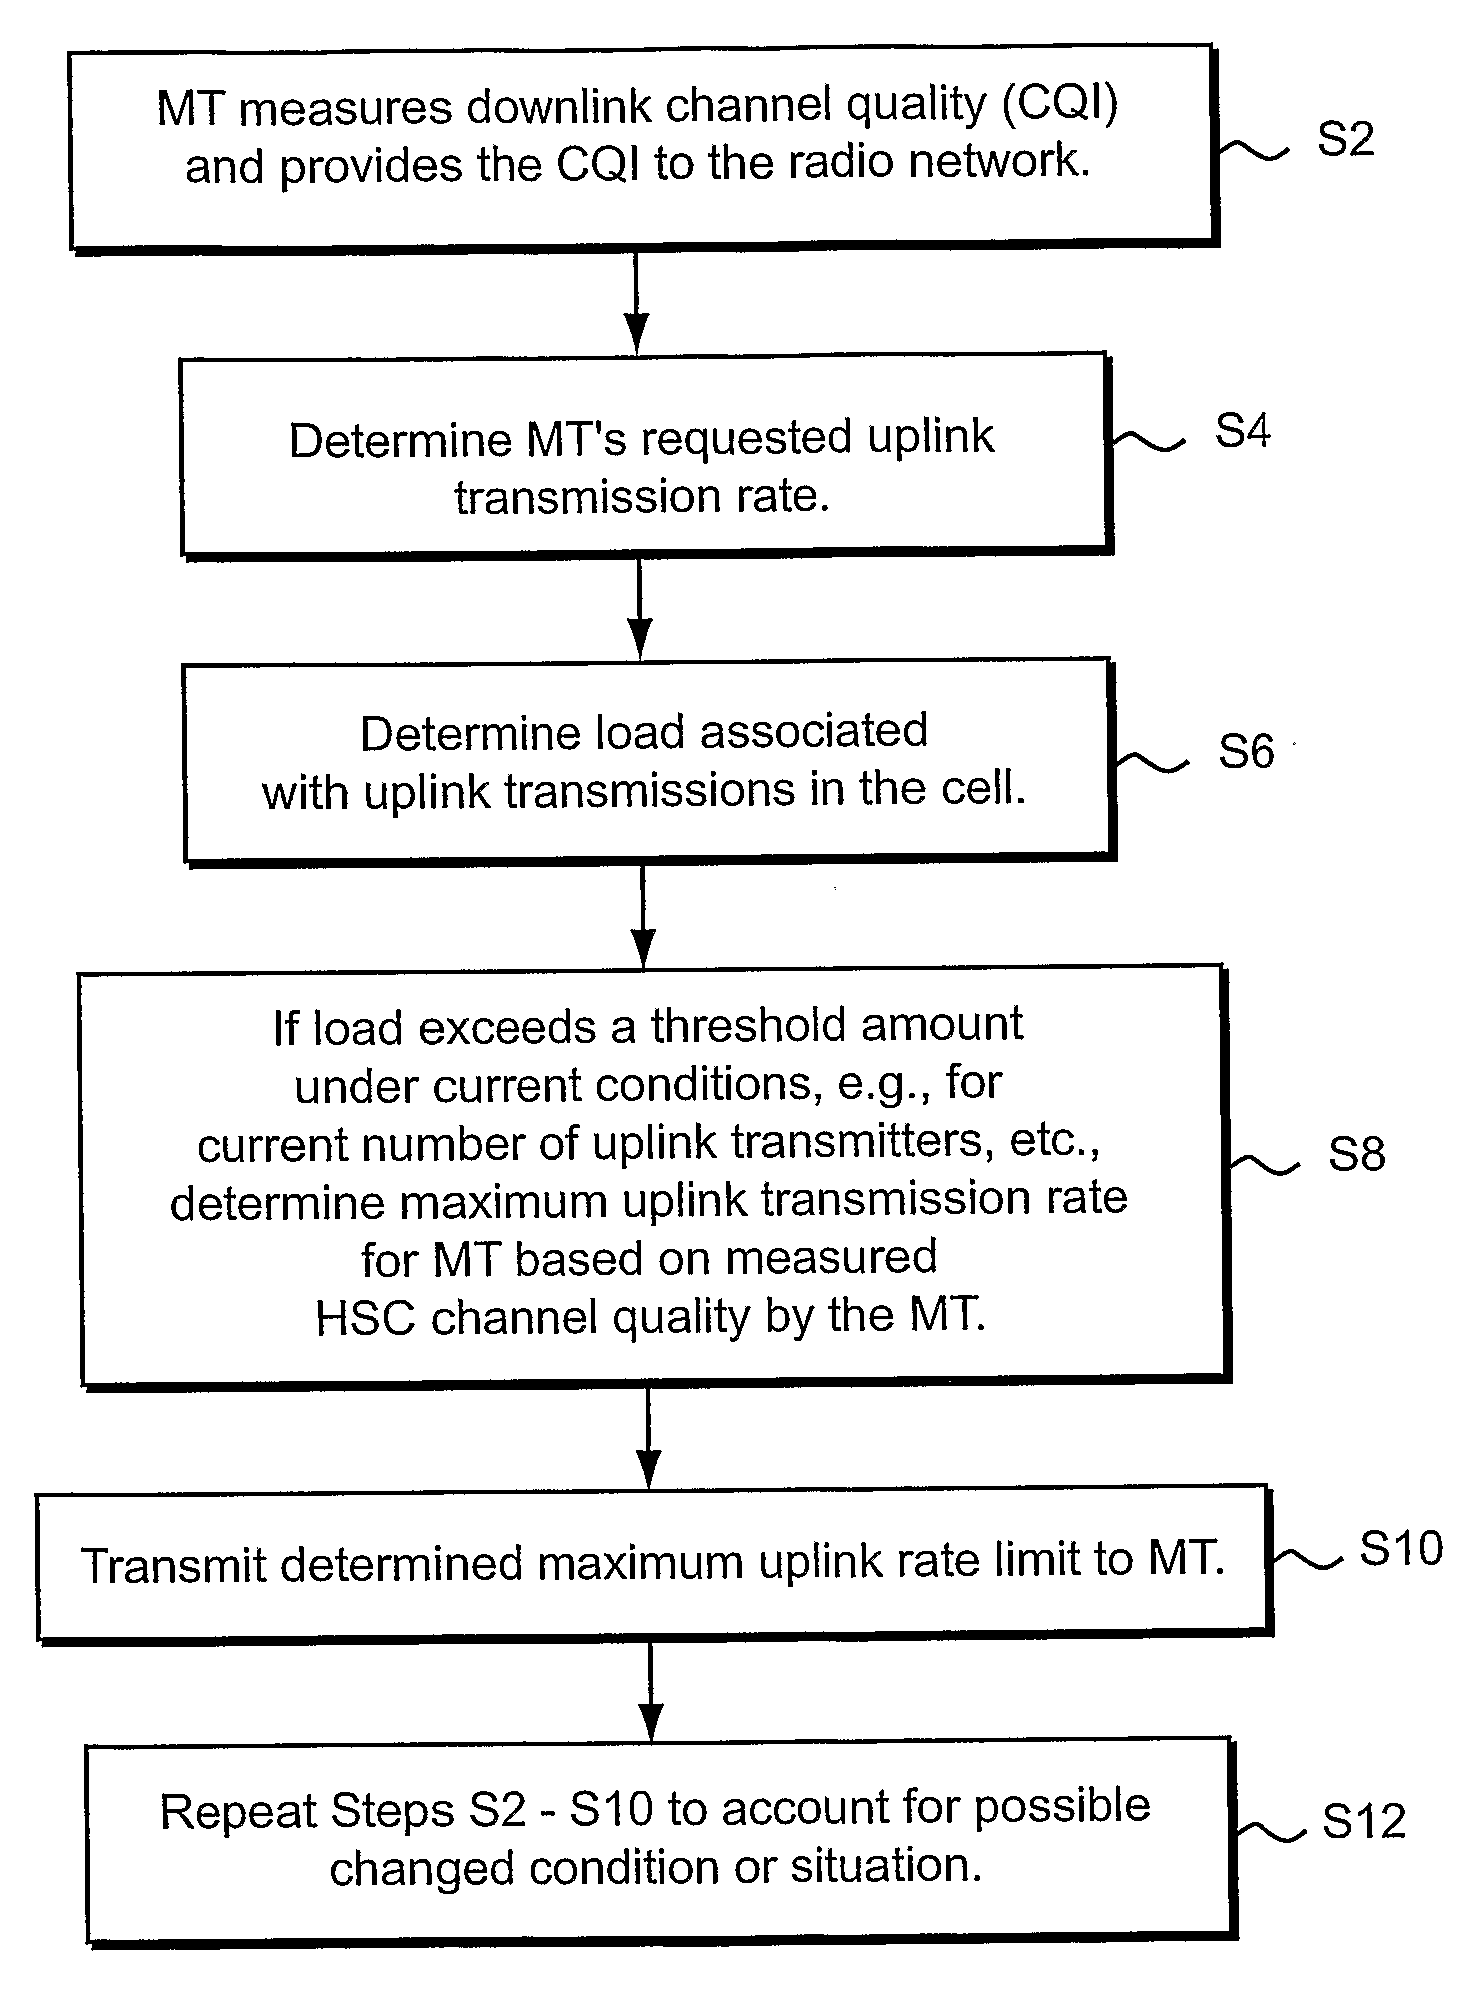 Setting an Uplink Transmission Rate Limit for Mobile Terminals Transmitting Over a High Speed Downlink Shared Channel